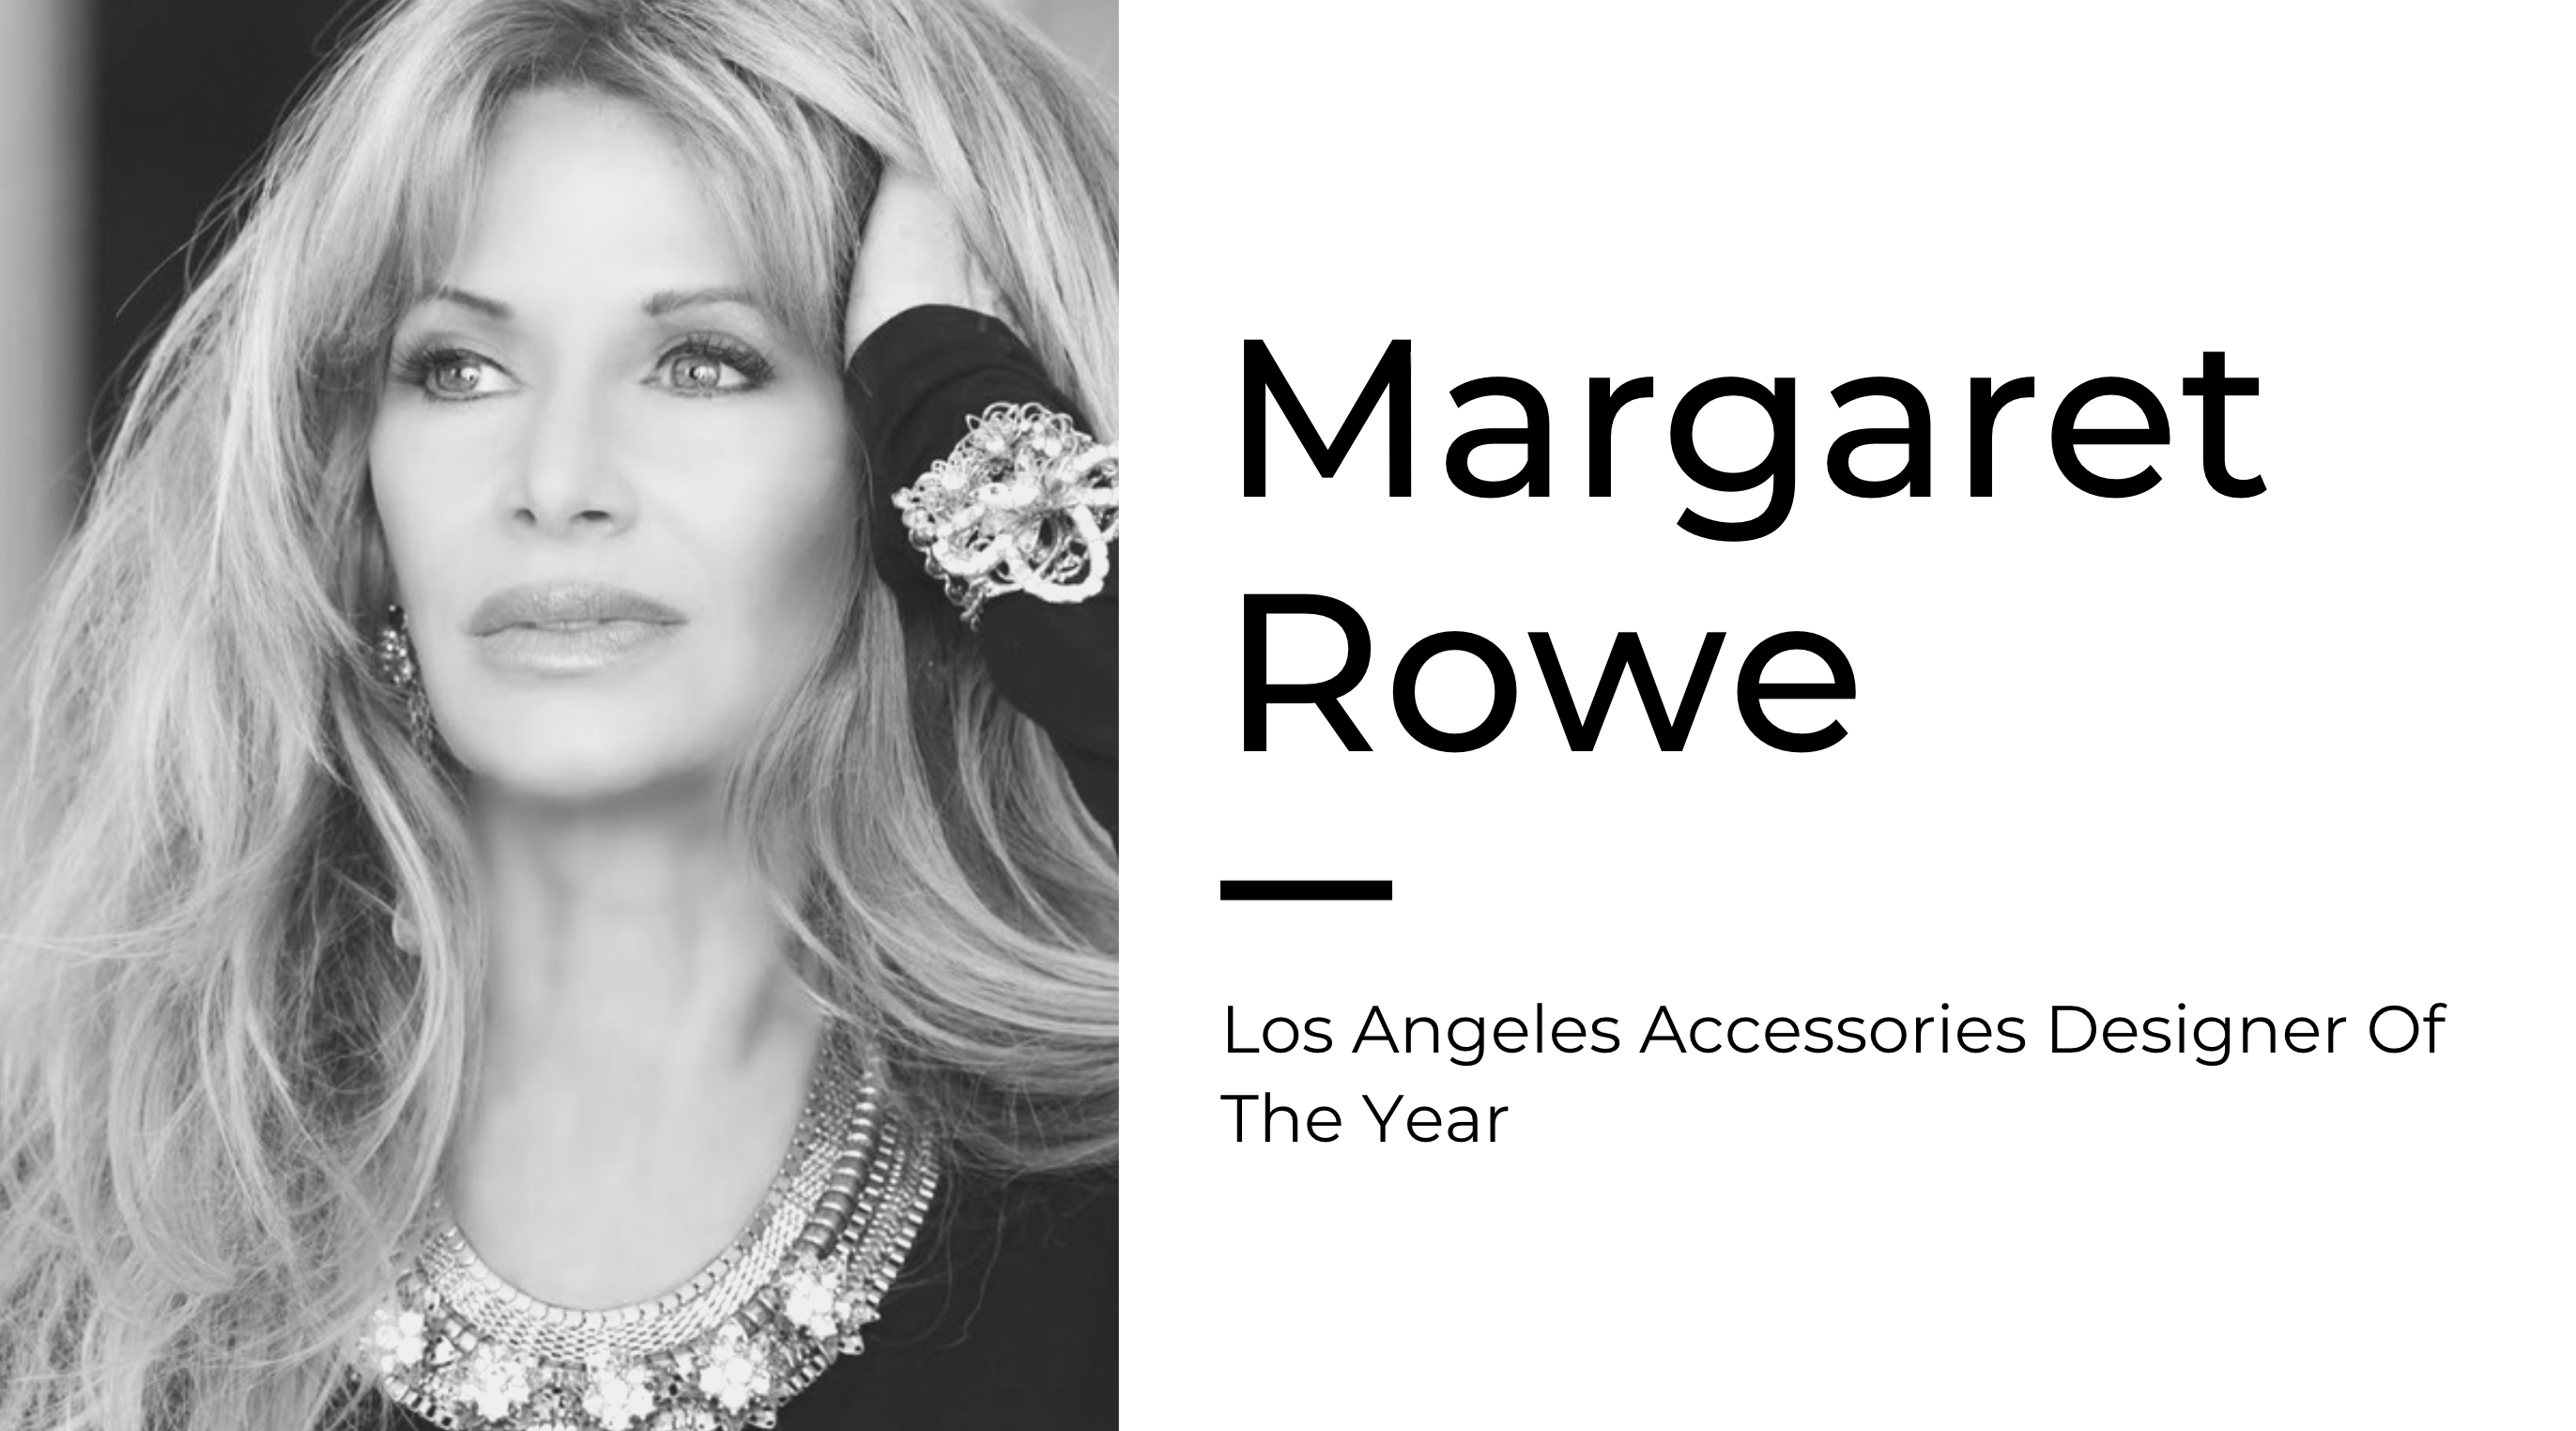 Margaret Rowe- Los Angeles Accessories Designer Of The Year, Hopes To Inspire Confidence & Self Expression In All Women - Lamo Footwear